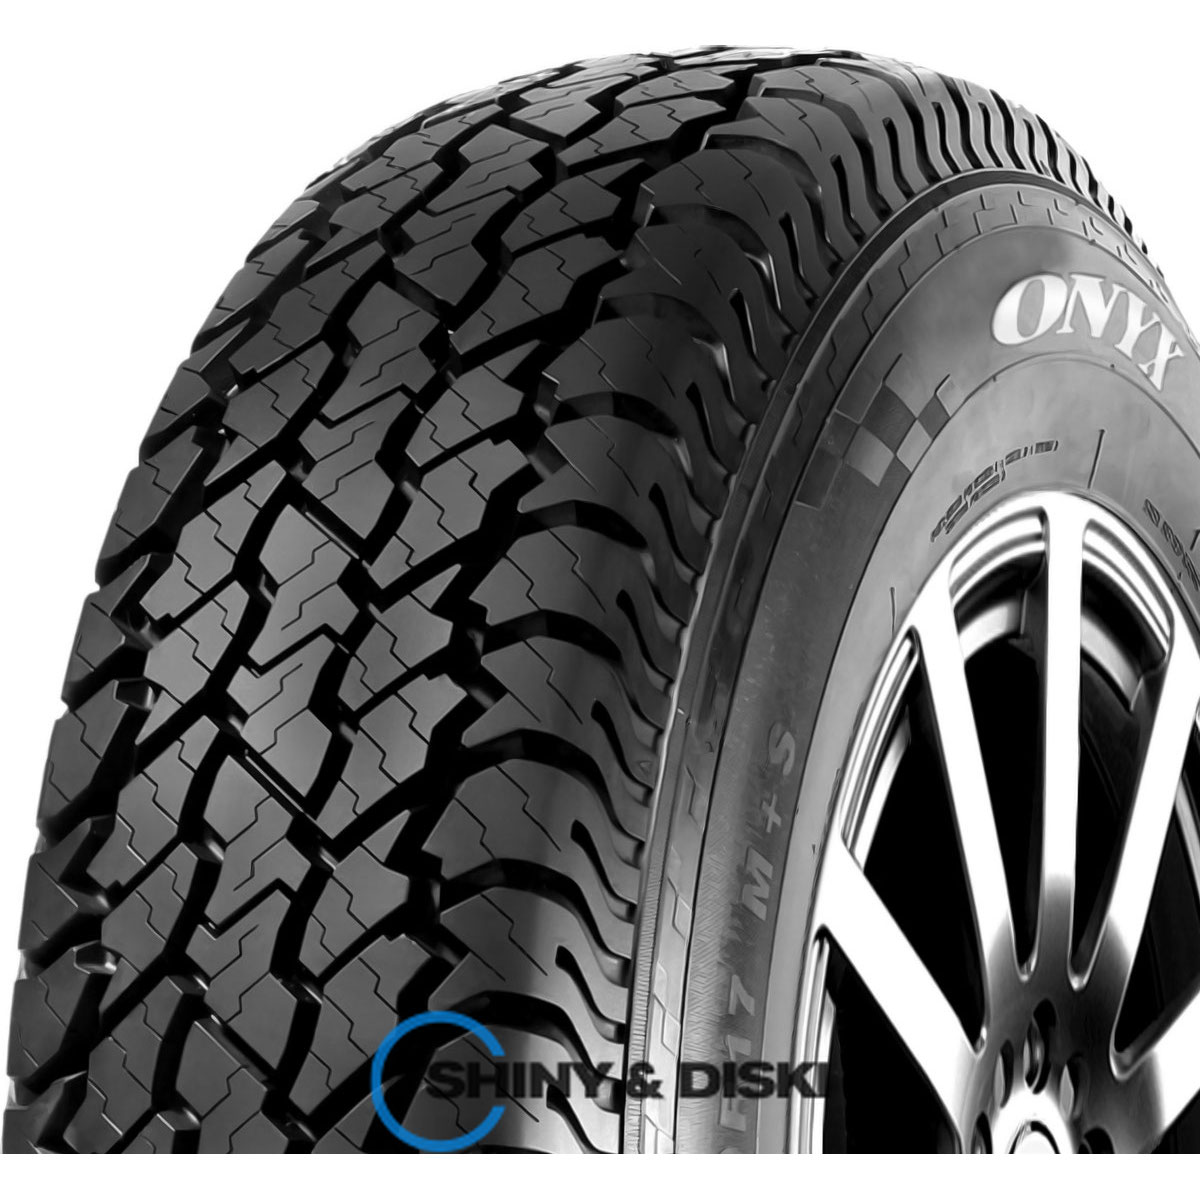 покришки onyx ny-at187 235/70 r16 106t